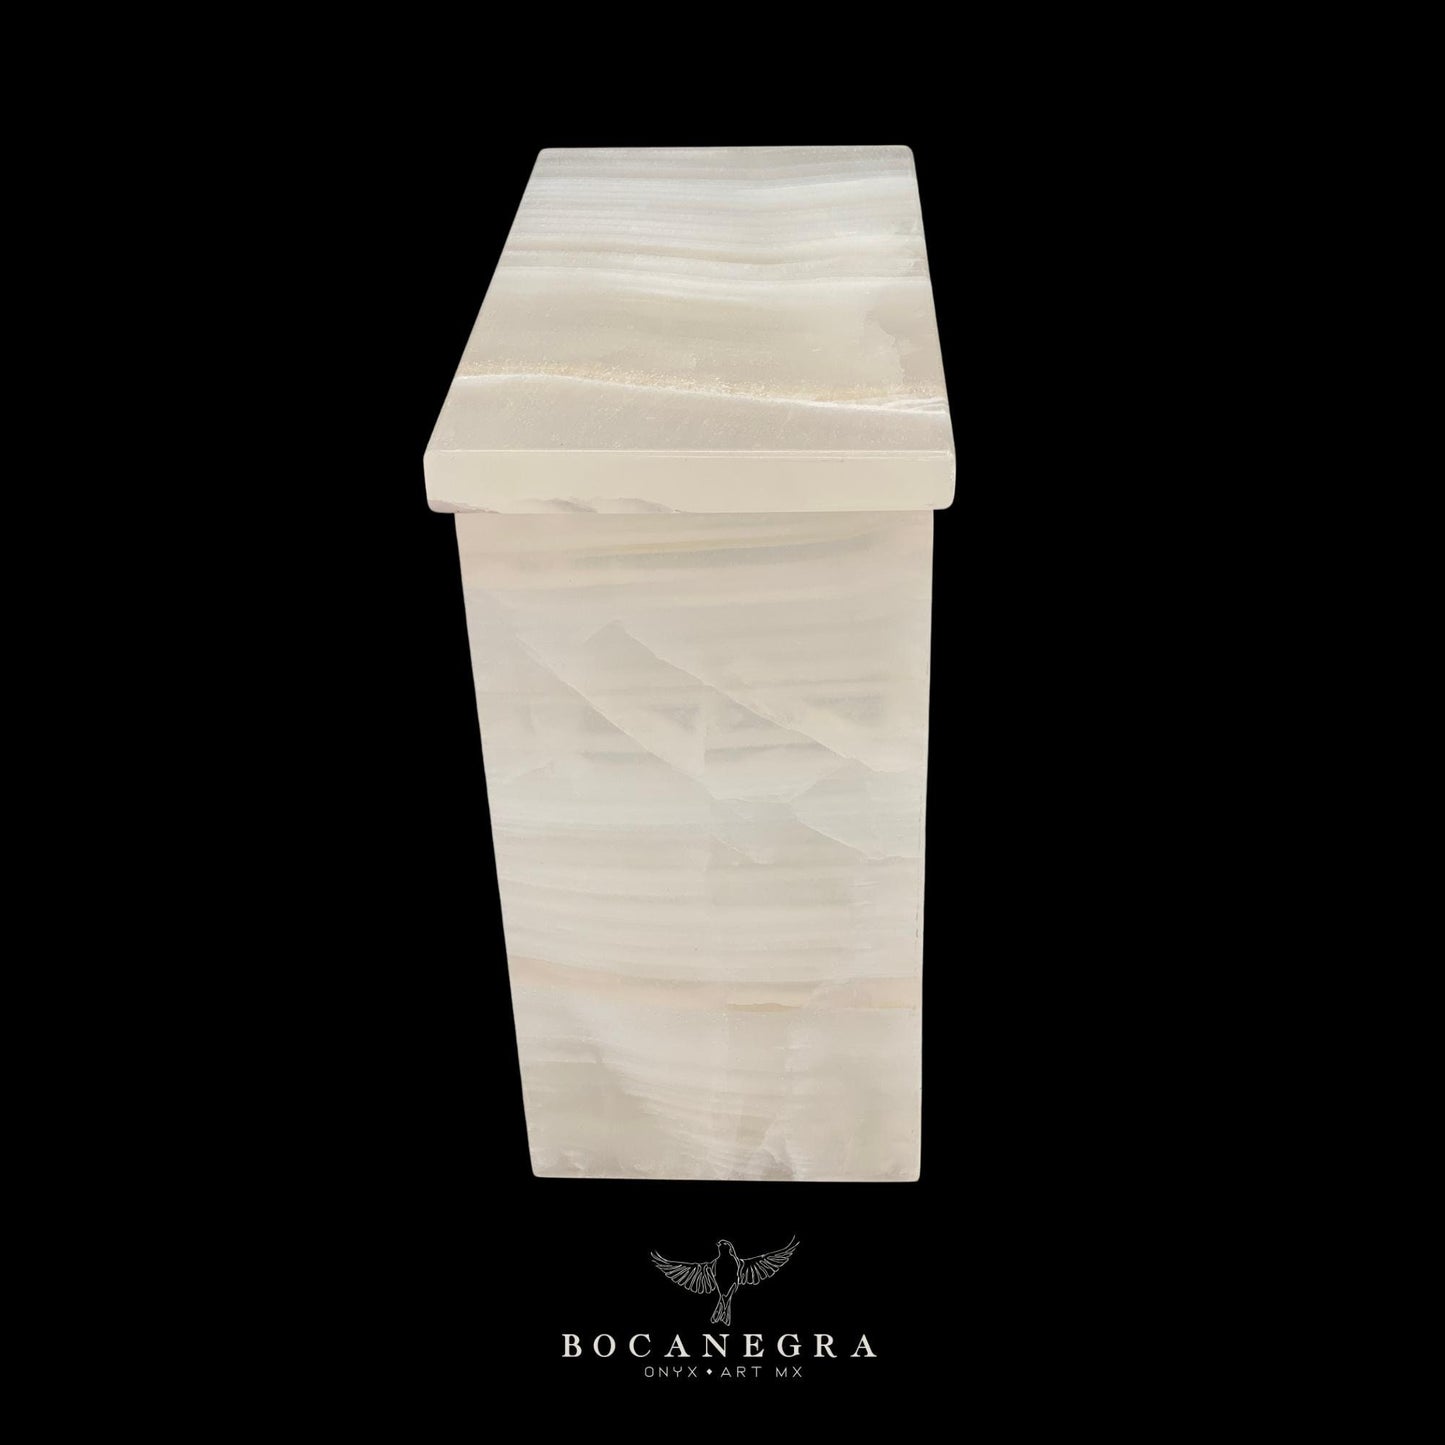 White Onyx Cremation Urn for Human or pet Ashes